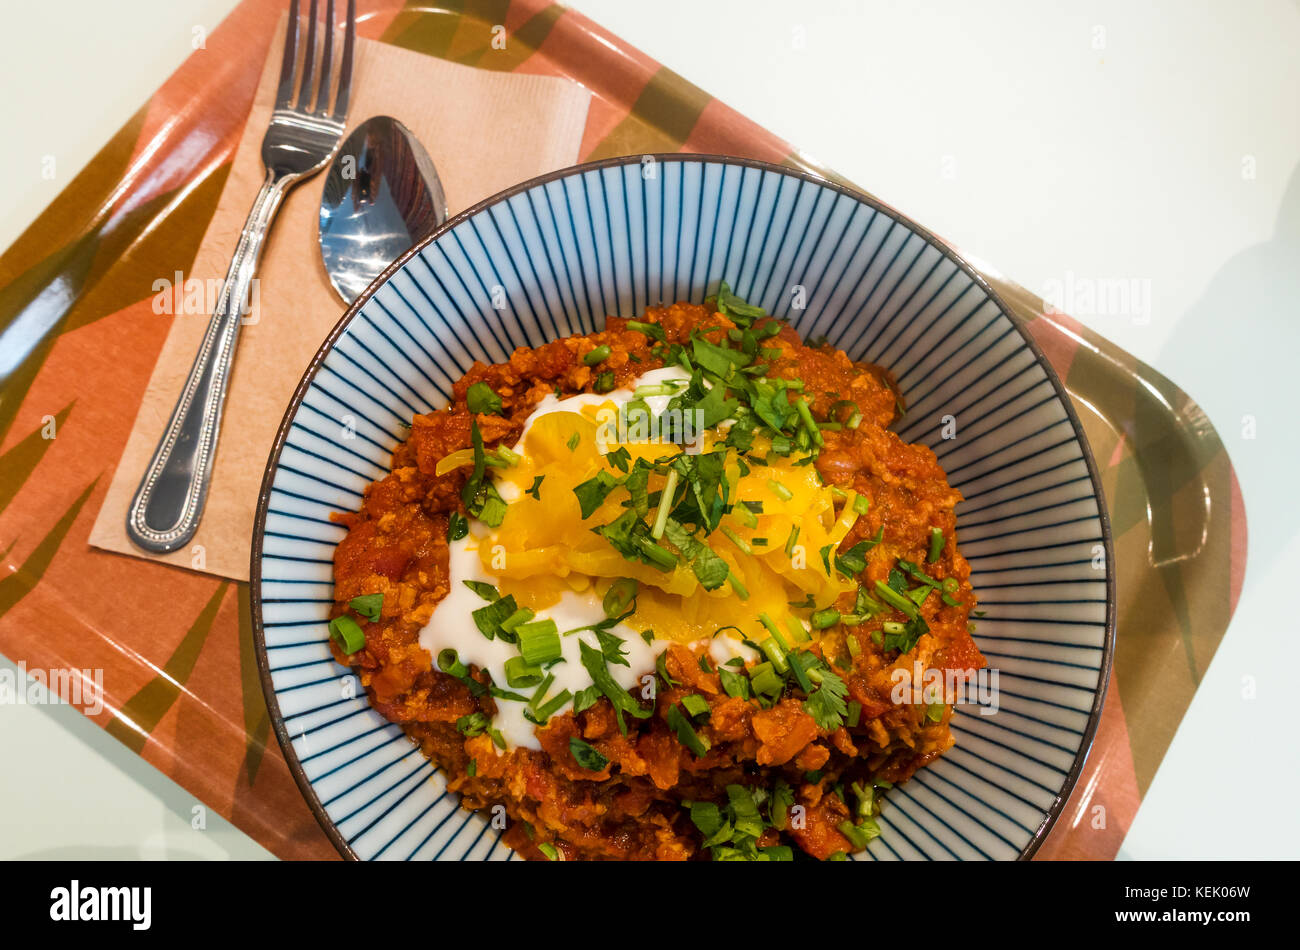 Spicy chili sin carne, a Tex-Mex vegetarian dish served at Le Botaniste in SoHo, New York City Stock Photo